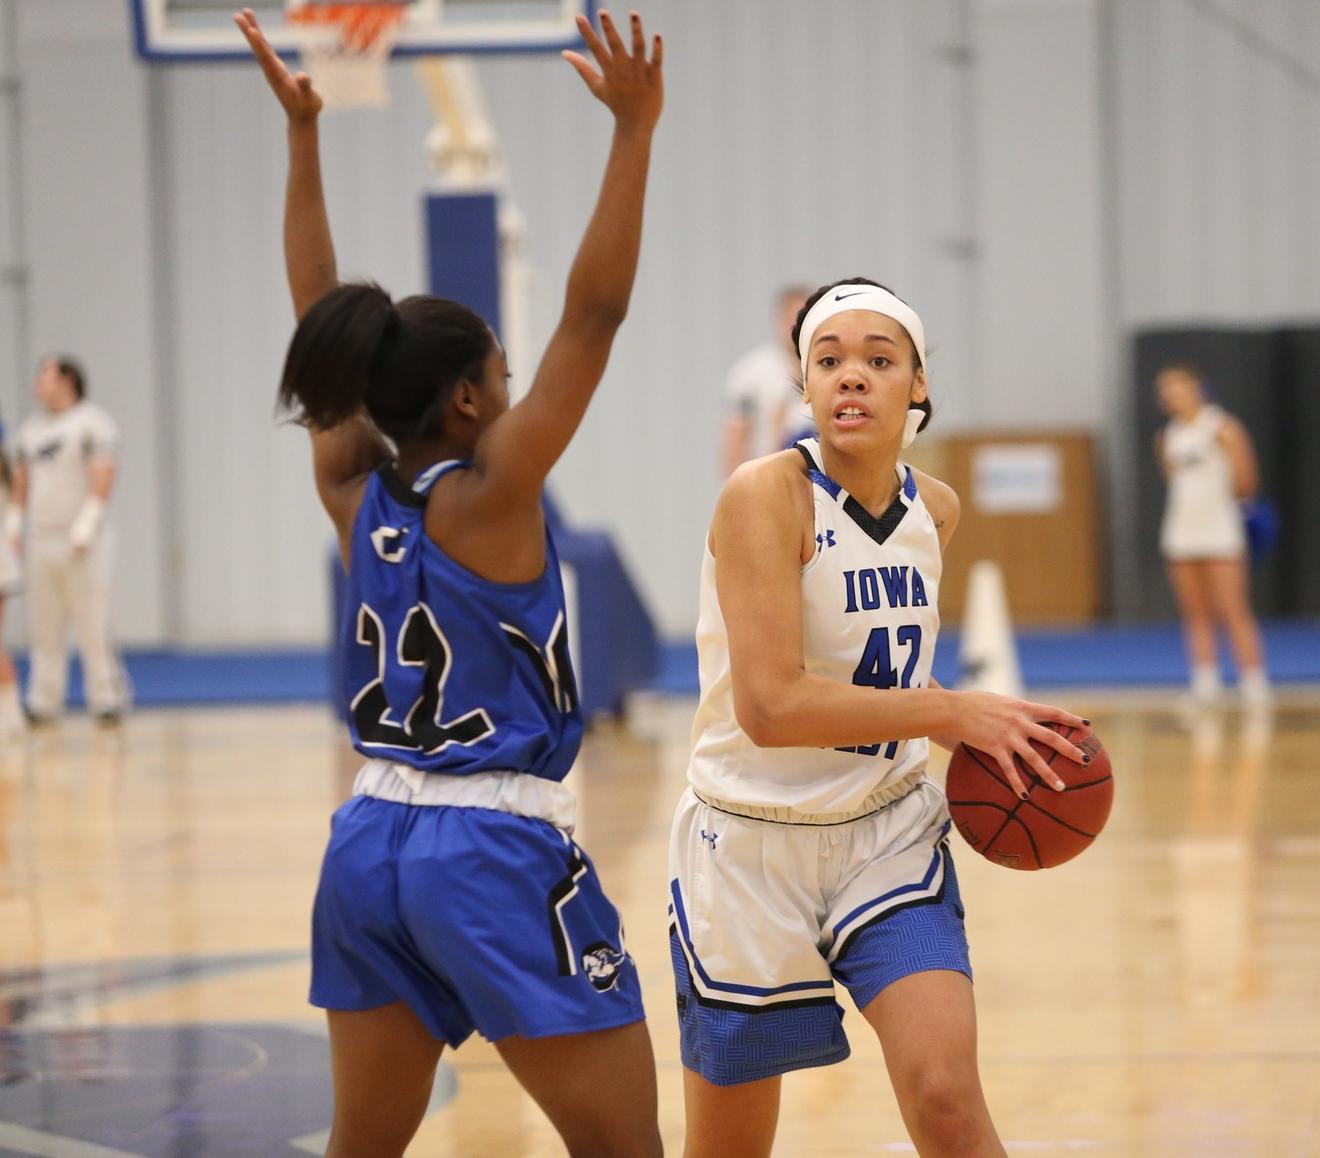 Freshman Kiara Dallmann pulled down 10 rebounds in the win over Southeast (NE) on Wednesday, January 24th.